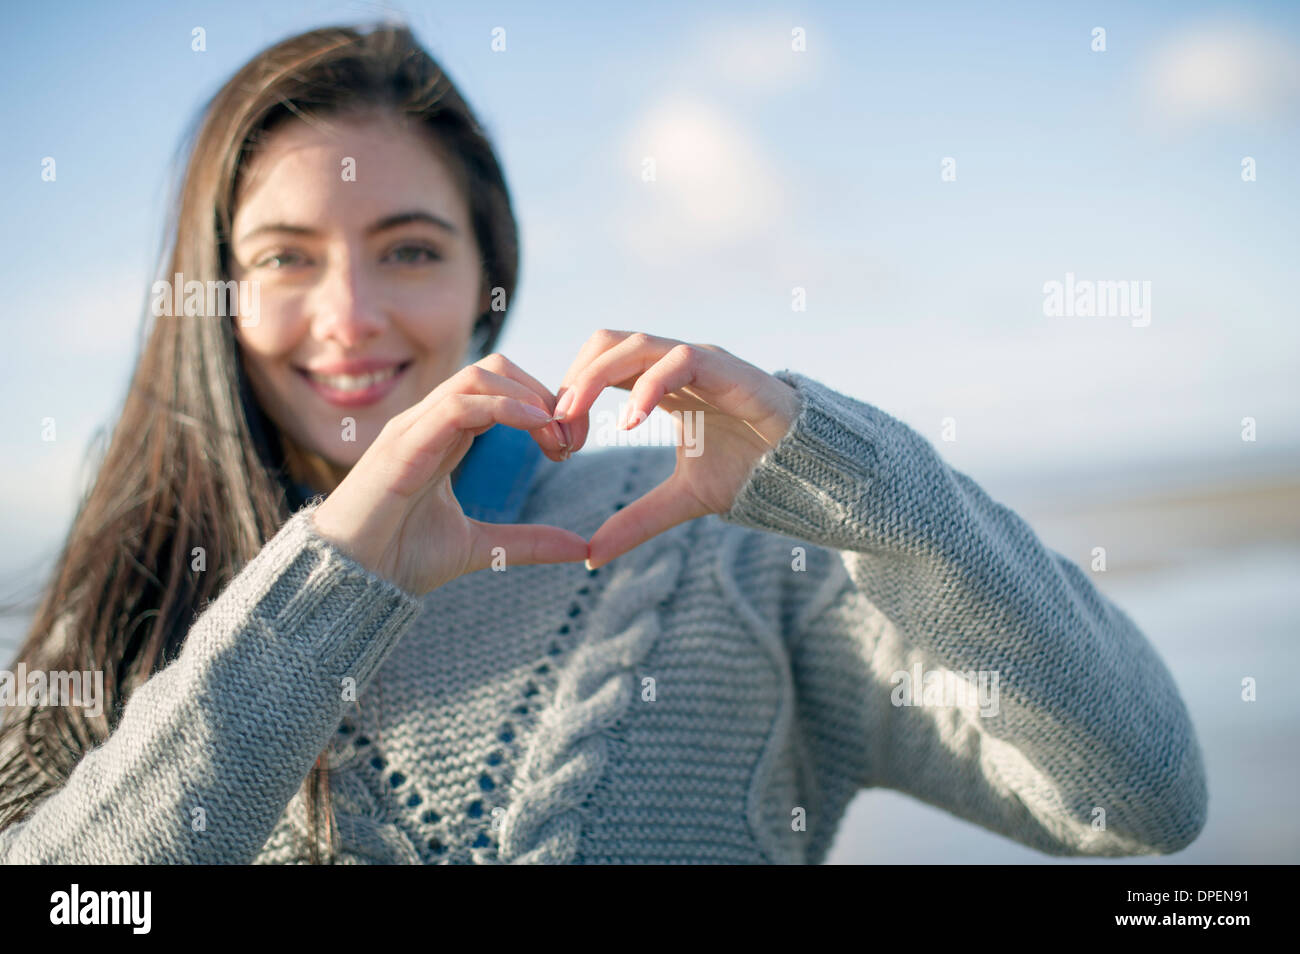 Young woman making heart shape with hands Banque D'Images